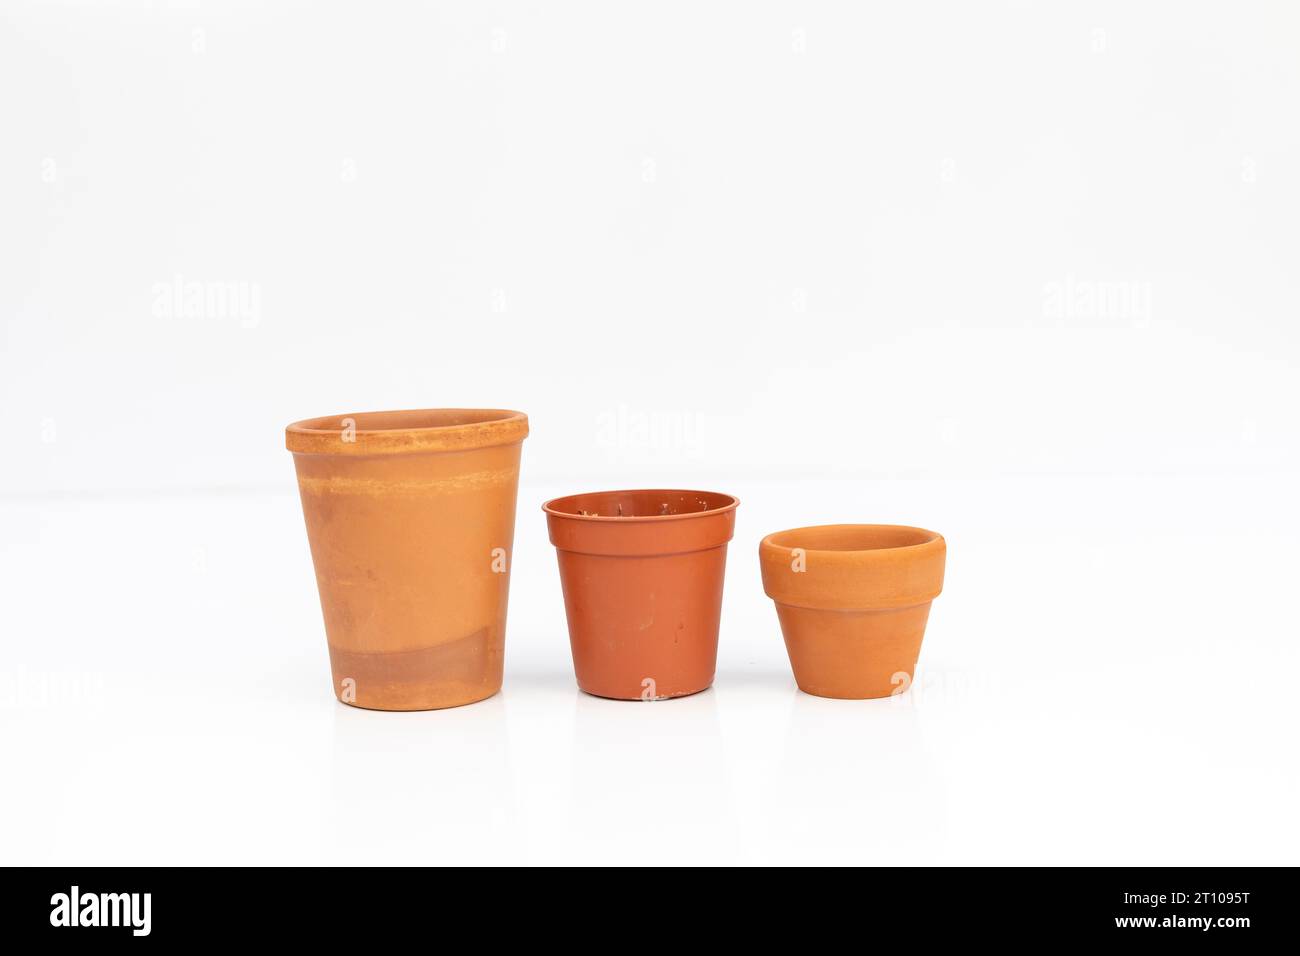 Row of empty terracotta plant pots in different sizes and shapes isolated on white background Stock Photo